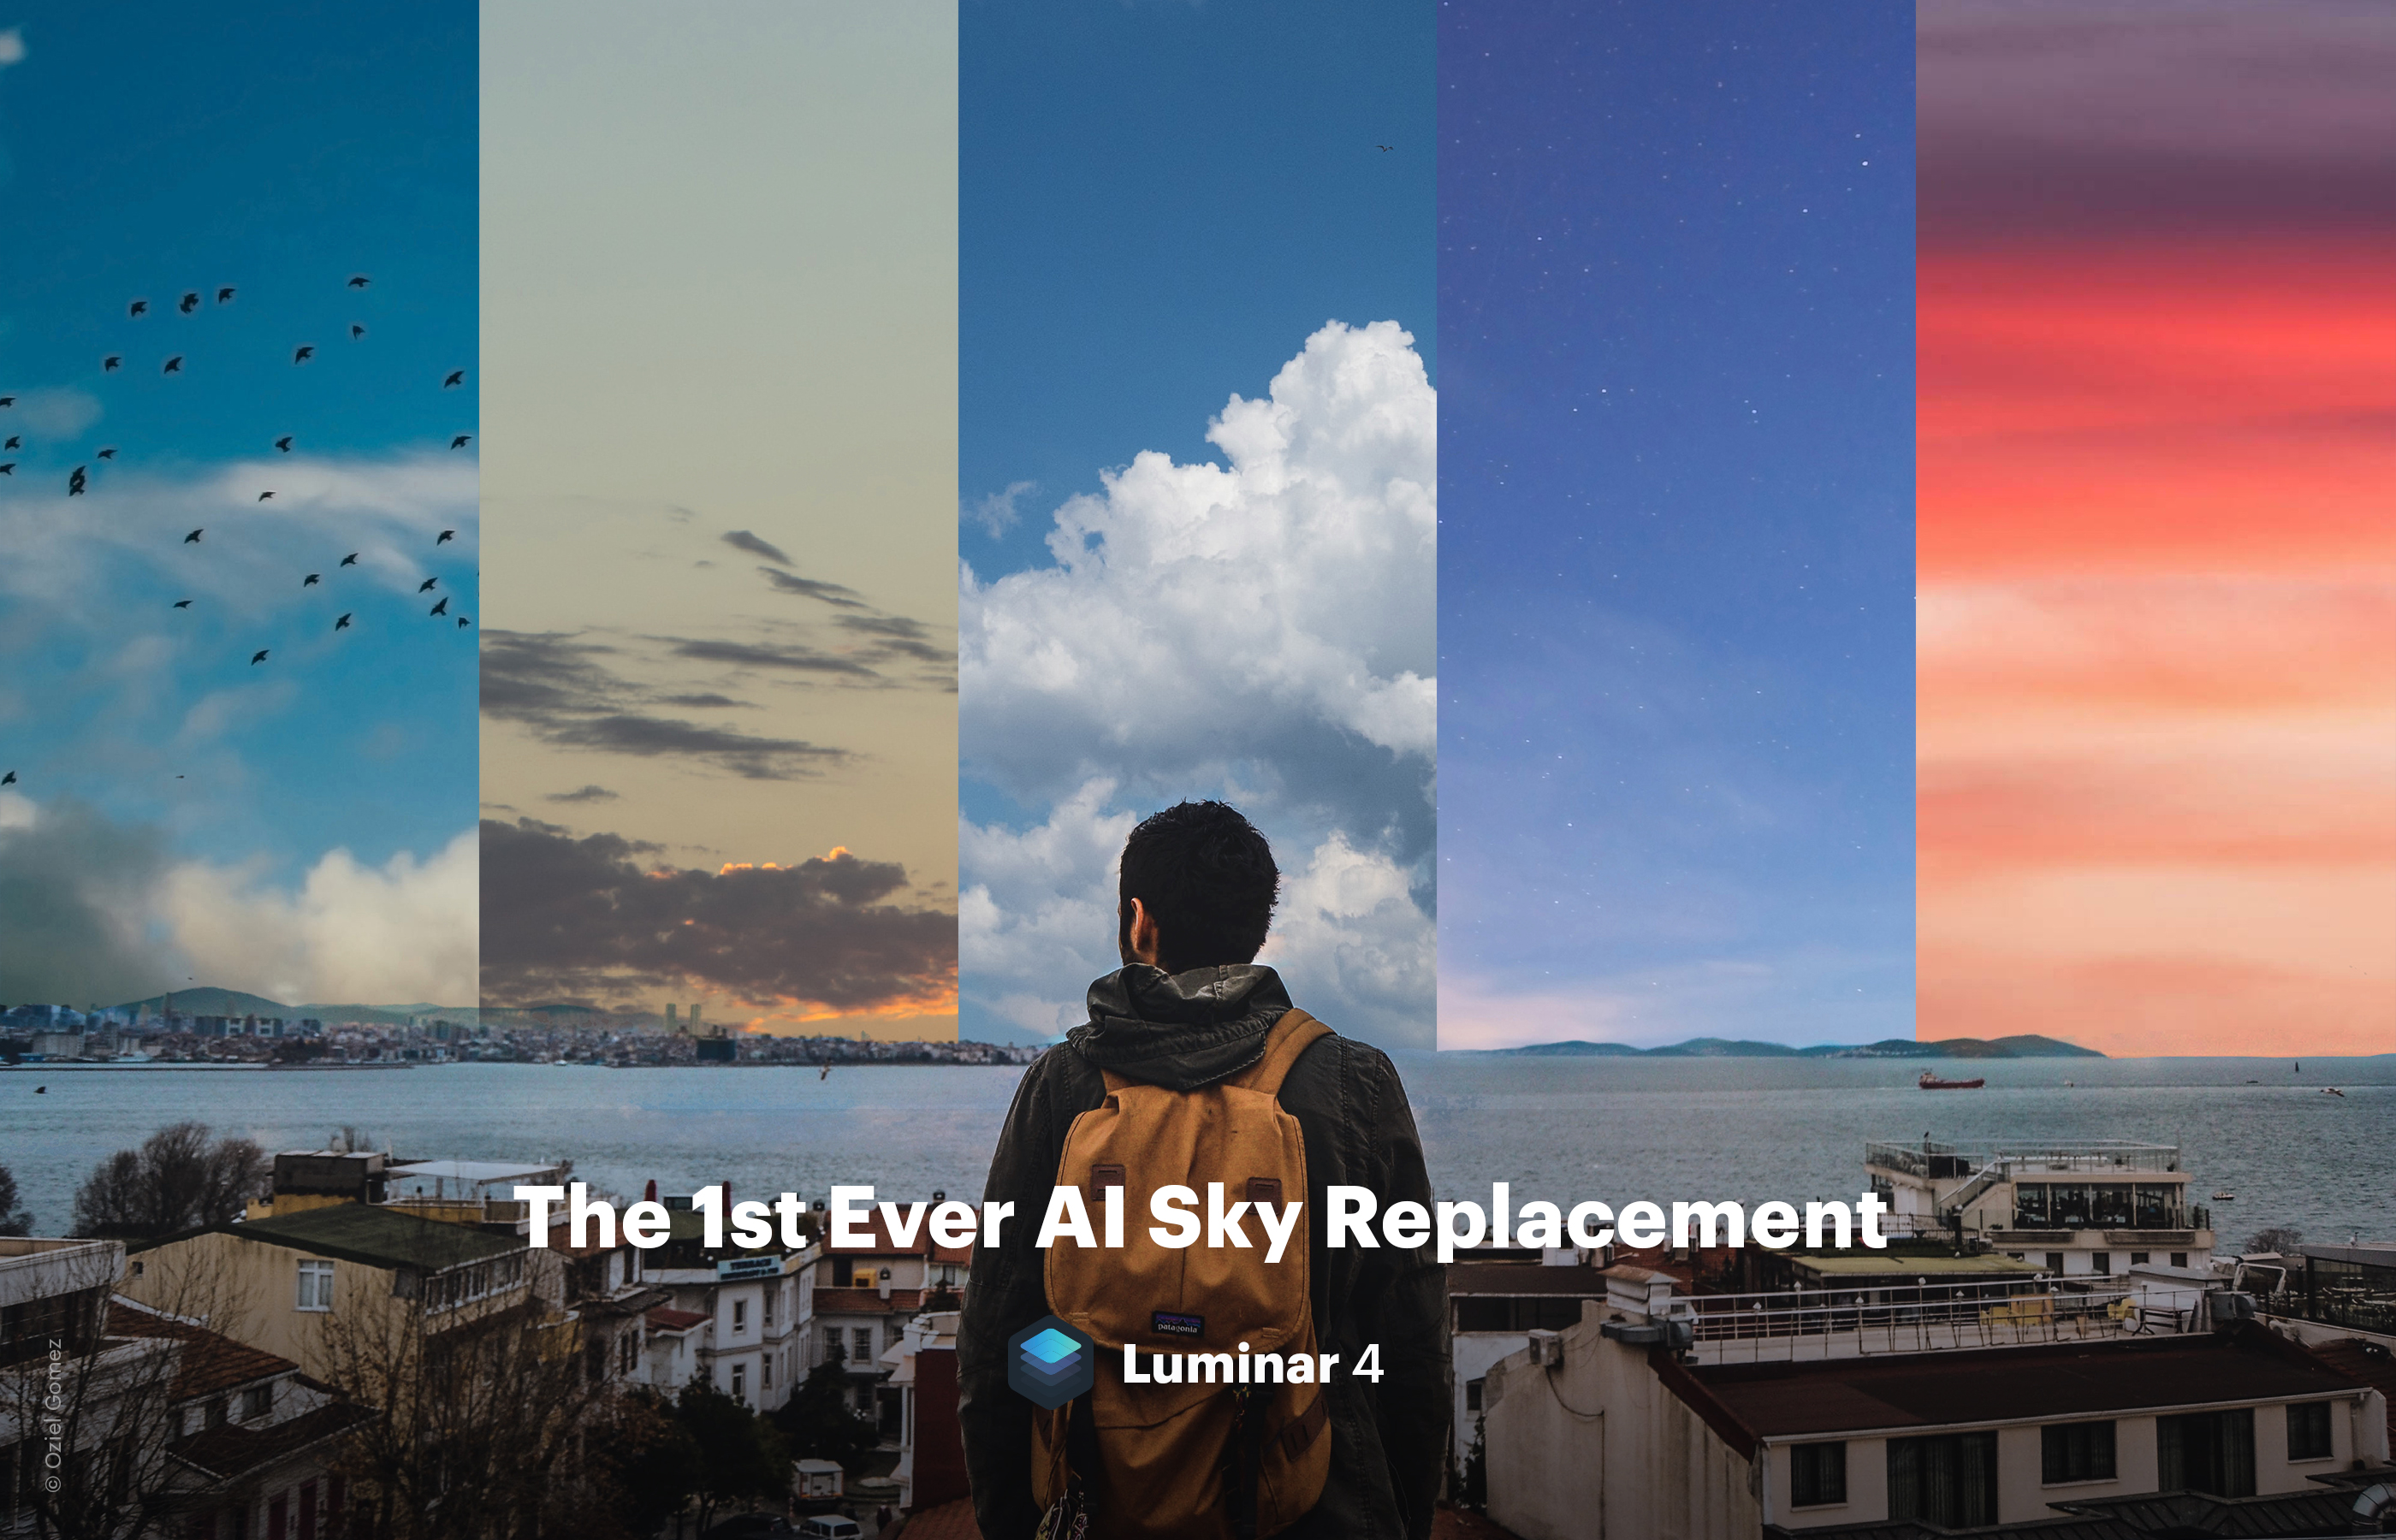 Skylum Announces Luminar 4 with AI-Powered Automatic Sky Replacement